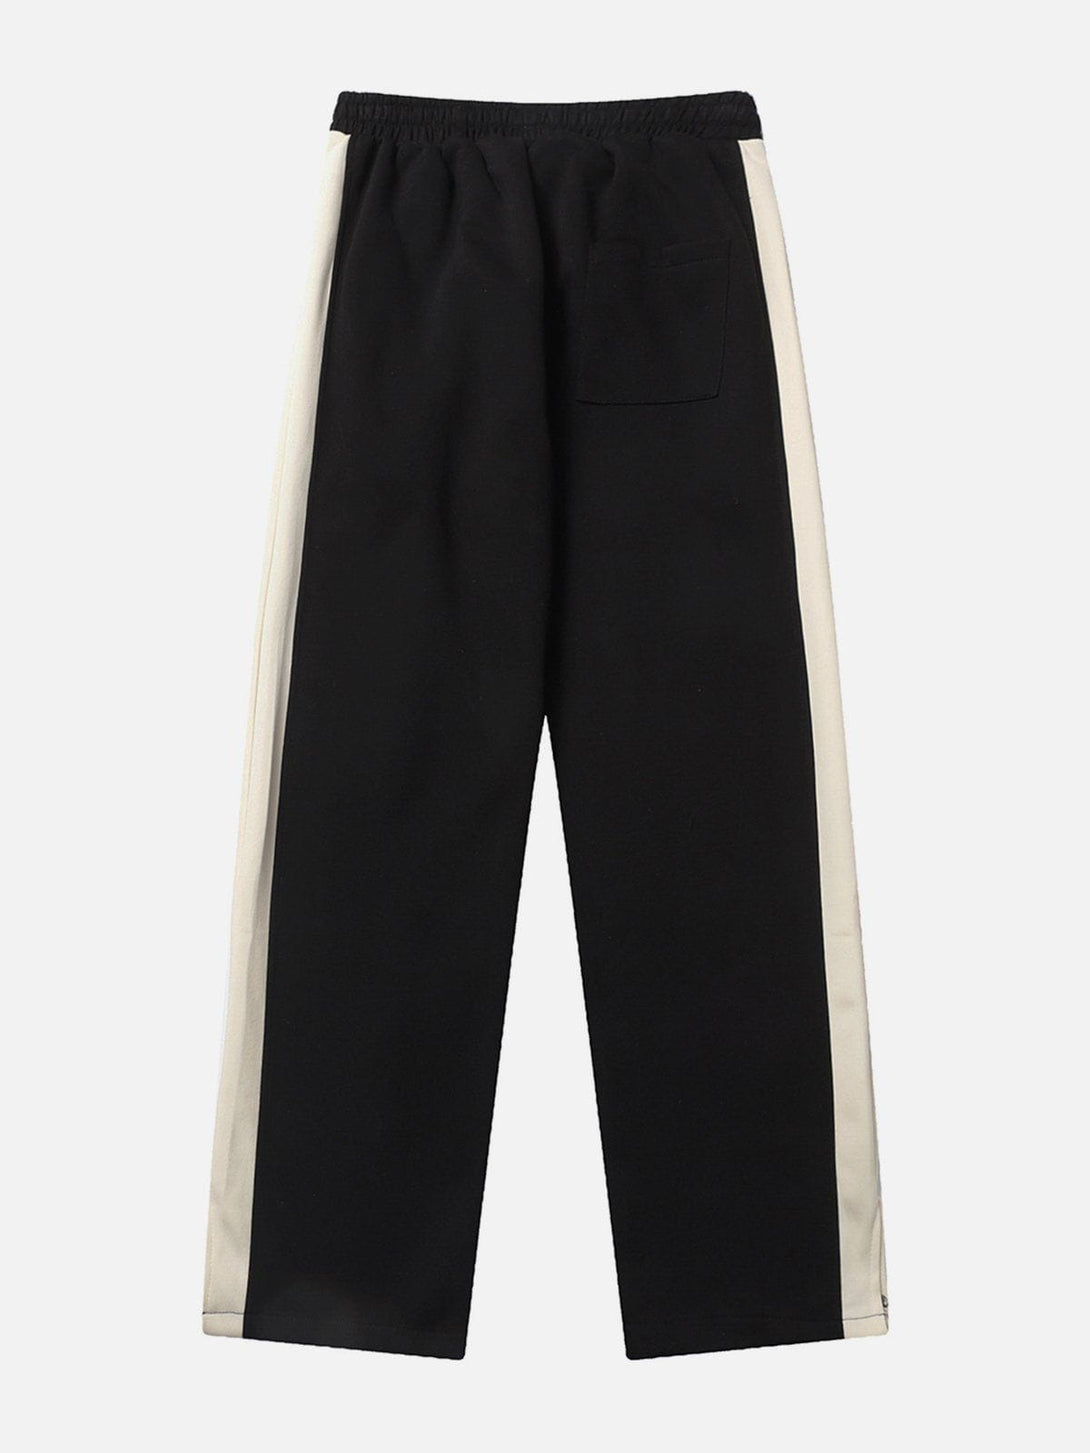 Levefly - Foot Mouth Slit Sweatpants - Streetwear Fashion - levefly.com